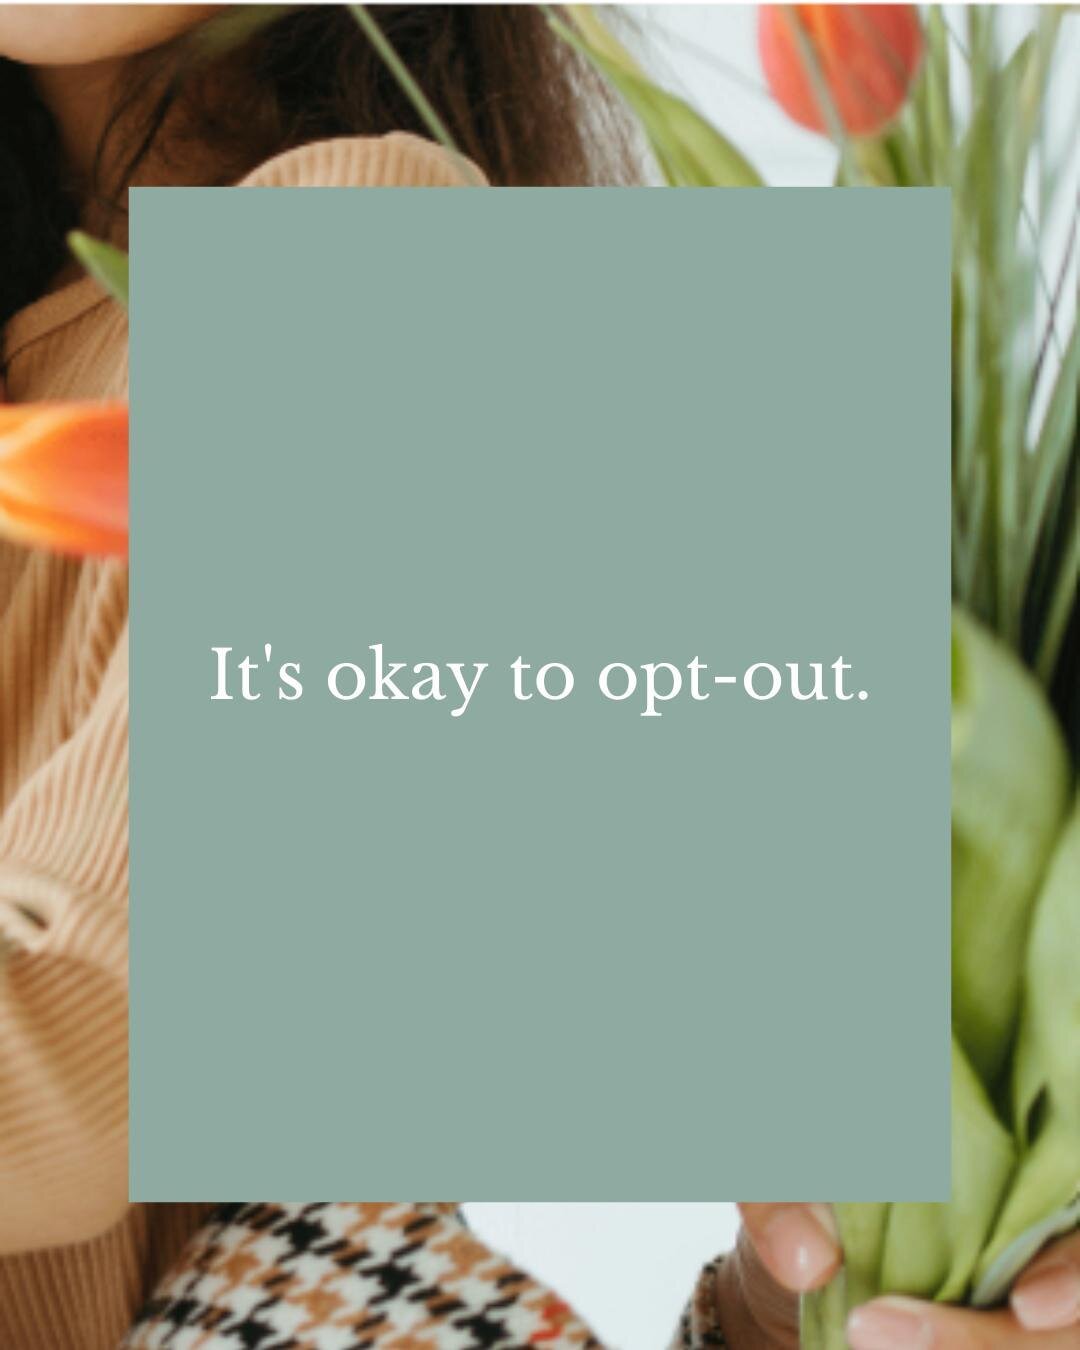 It&rsquo;s okay to opt out. 🤍 Marketers are recognizing that Mother&rsquo;s Day is hard for many people by offering their customers the chance to opt out of messaging related to the holiday. We support this inclusive approach. 💌 To those who don't 